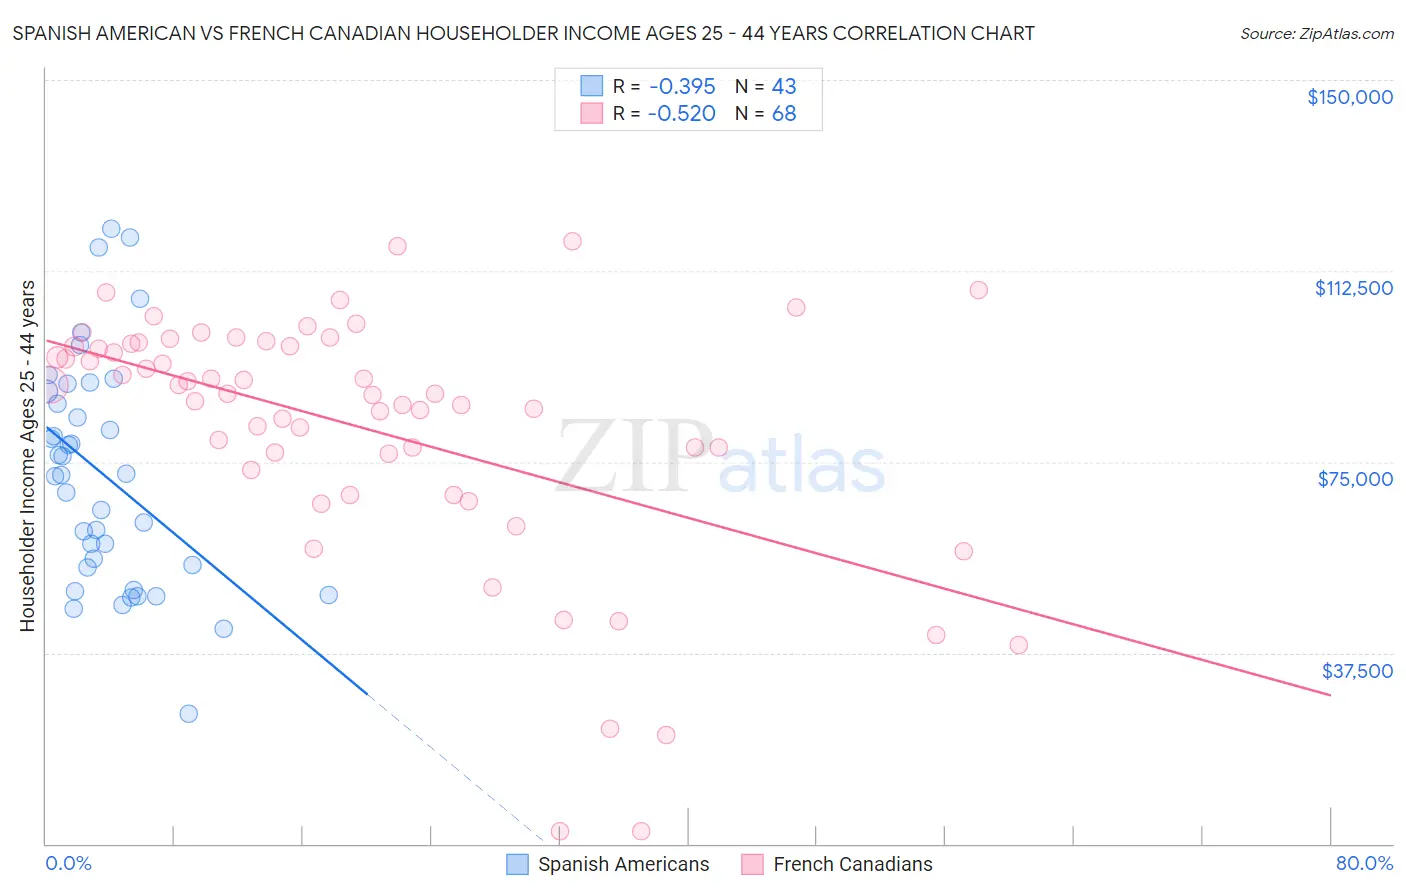 Spanish American vs French Canadian Householder Income Ages 25 - 44 years